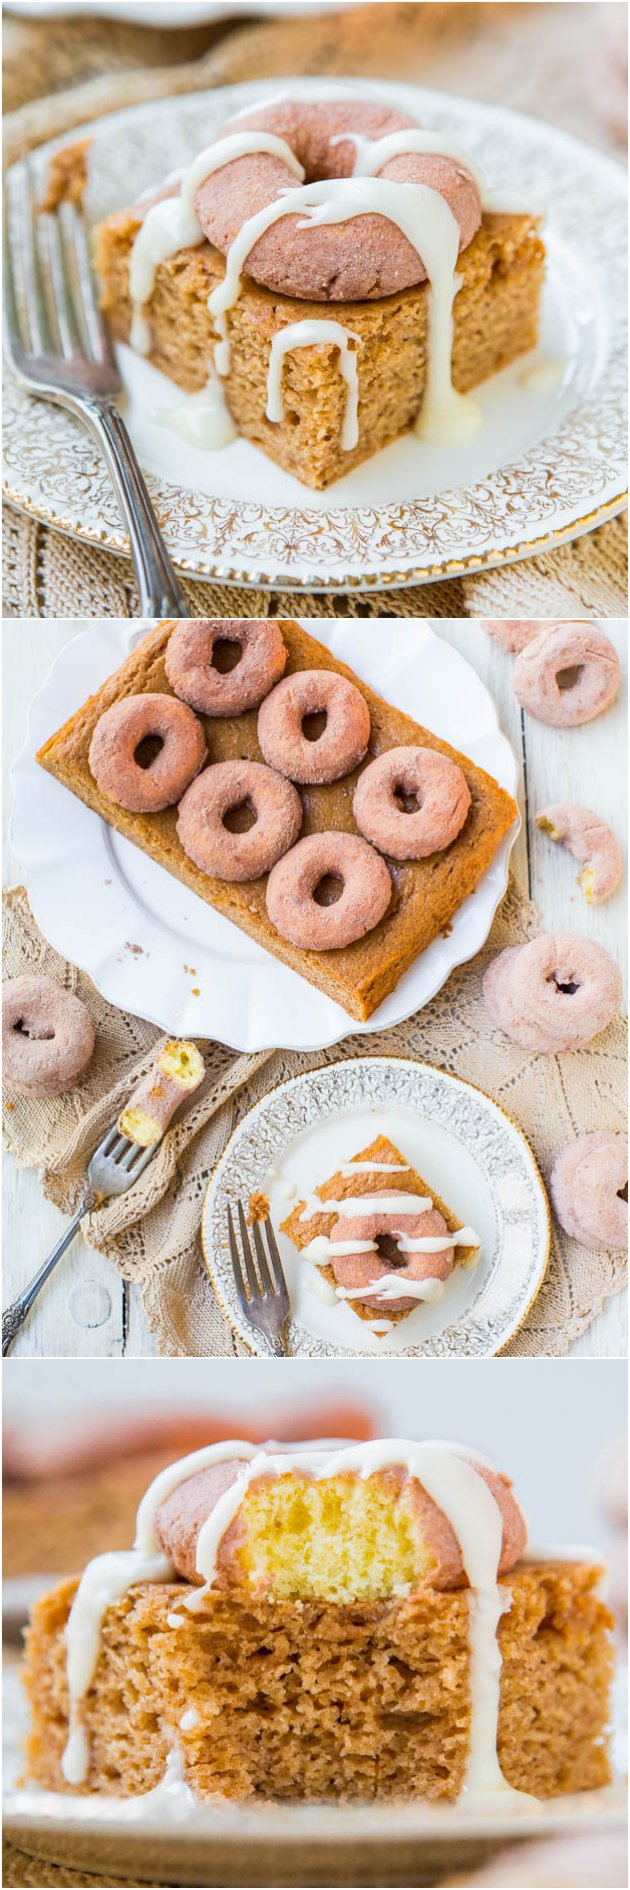 Cinnamon-Sugar Mini Donut-Topped Snickerdoodle Cake - Can't decide between donuts or coffee cake for breakfast? You can have them both in this soft, easy, one-bowl, no-mixer cake that's a crowd favorite! at averiecooks.com